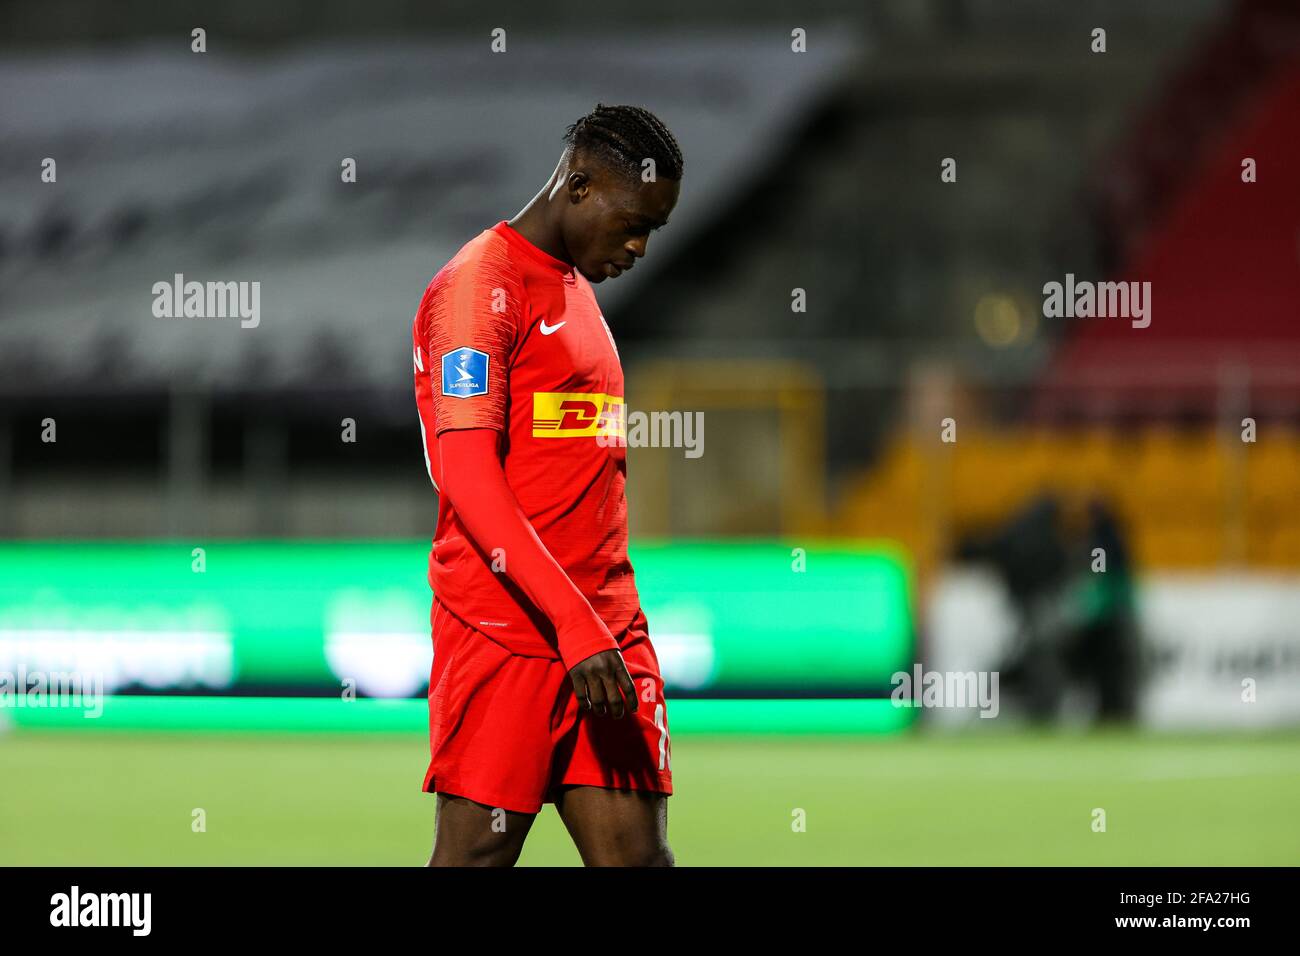 Farum, Denmark. 21st Apr, 2021. Kamal-Deen Sulemana (10) of FC  Nordsjaelland seen during the 3F Superliga match between FC Nordsjaelland  and Brondby IF in Right to Dream Park in Farum. (Photo Credit: